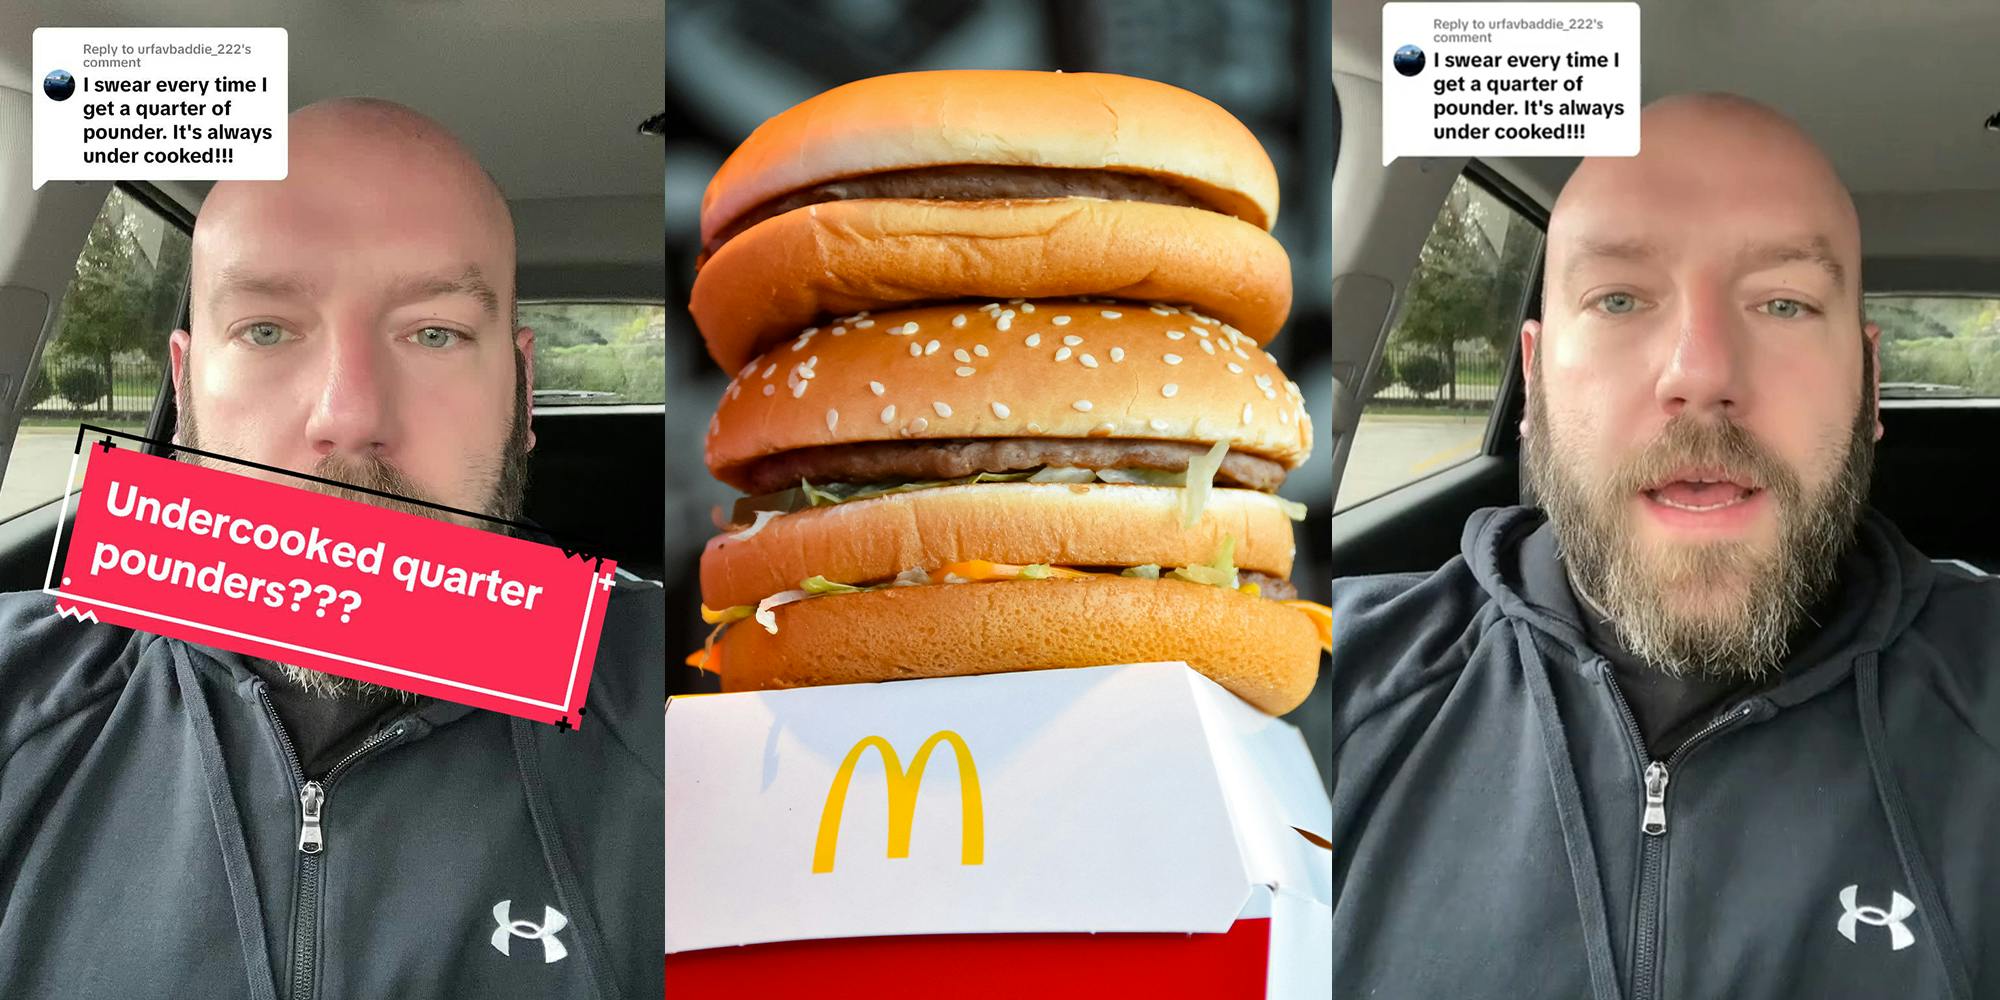 Former McDonald’s corporate chef reveals why Quarter-Pounders are often under-cooked